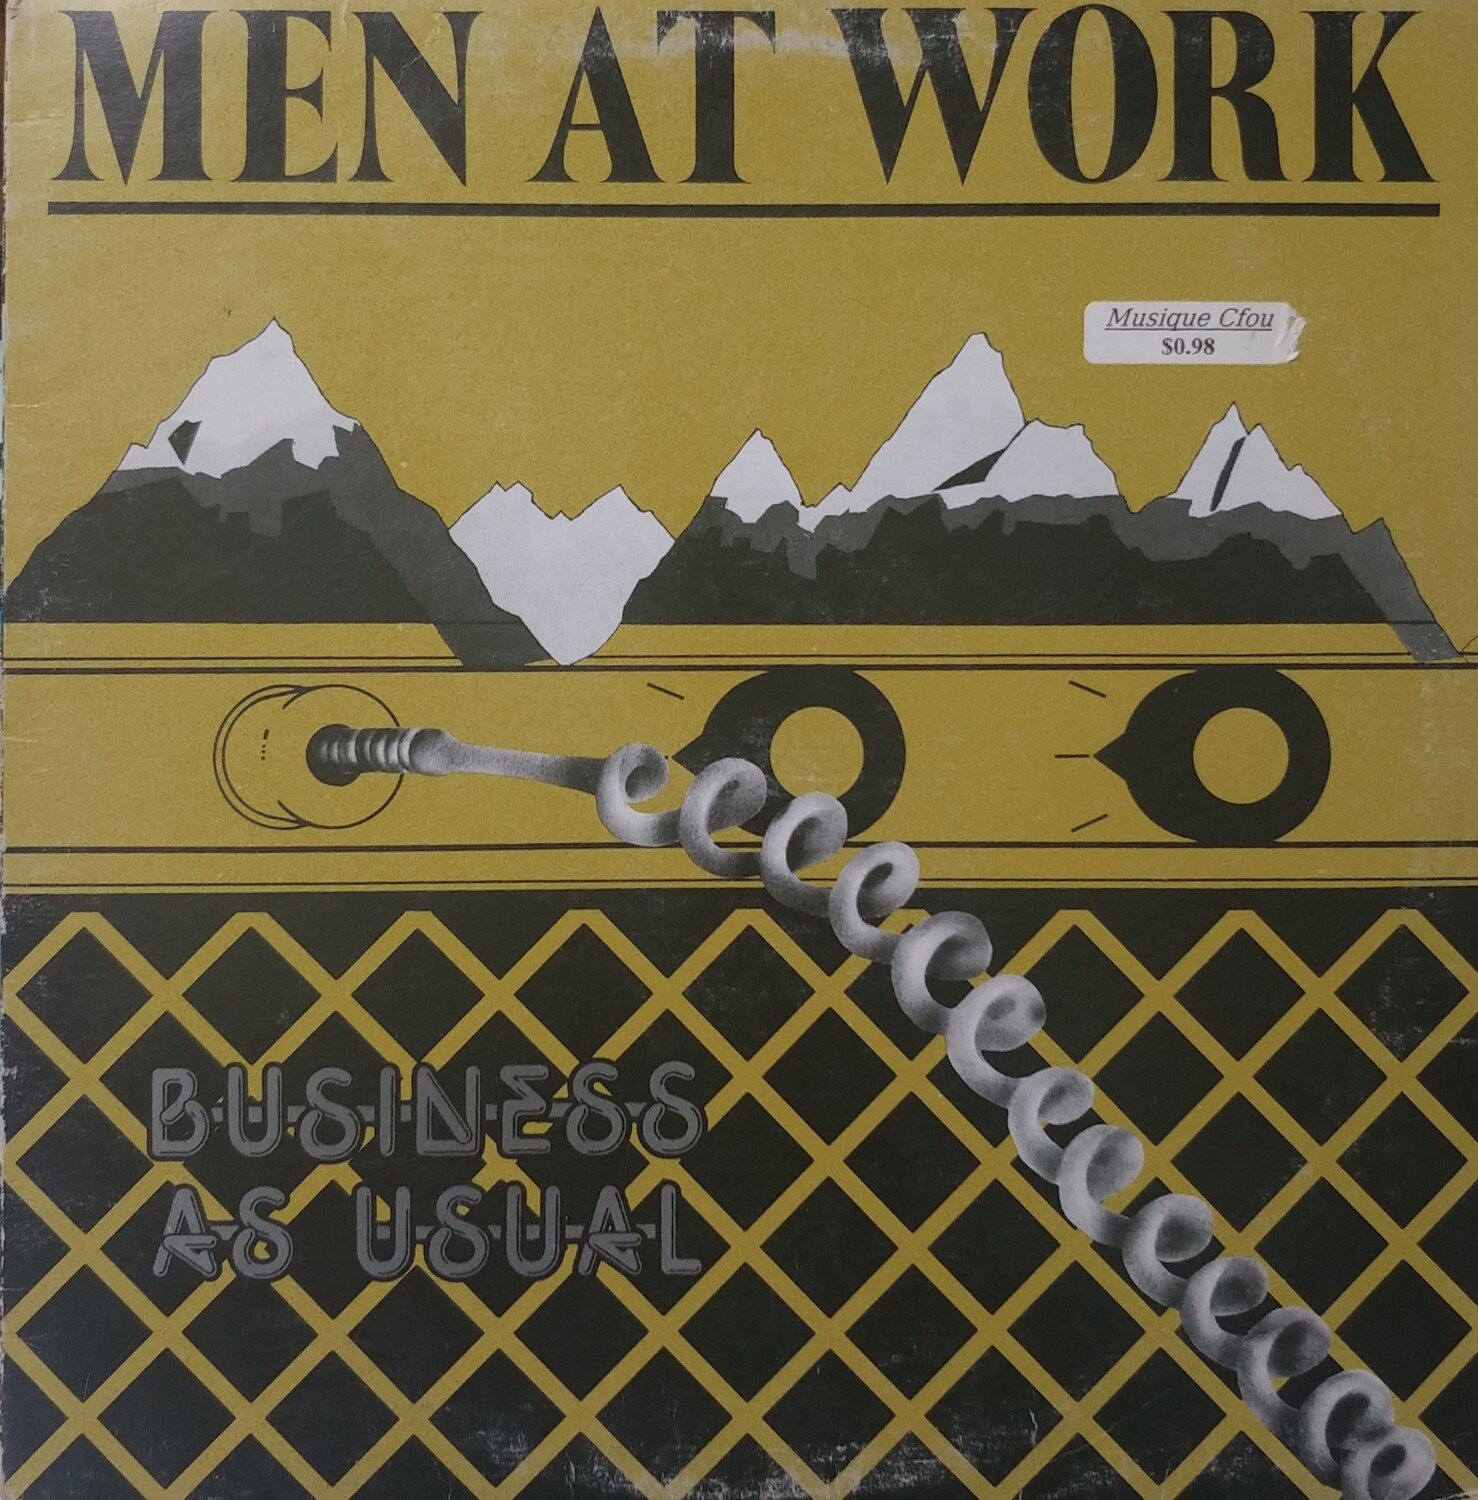 Men at Work - Business as usual